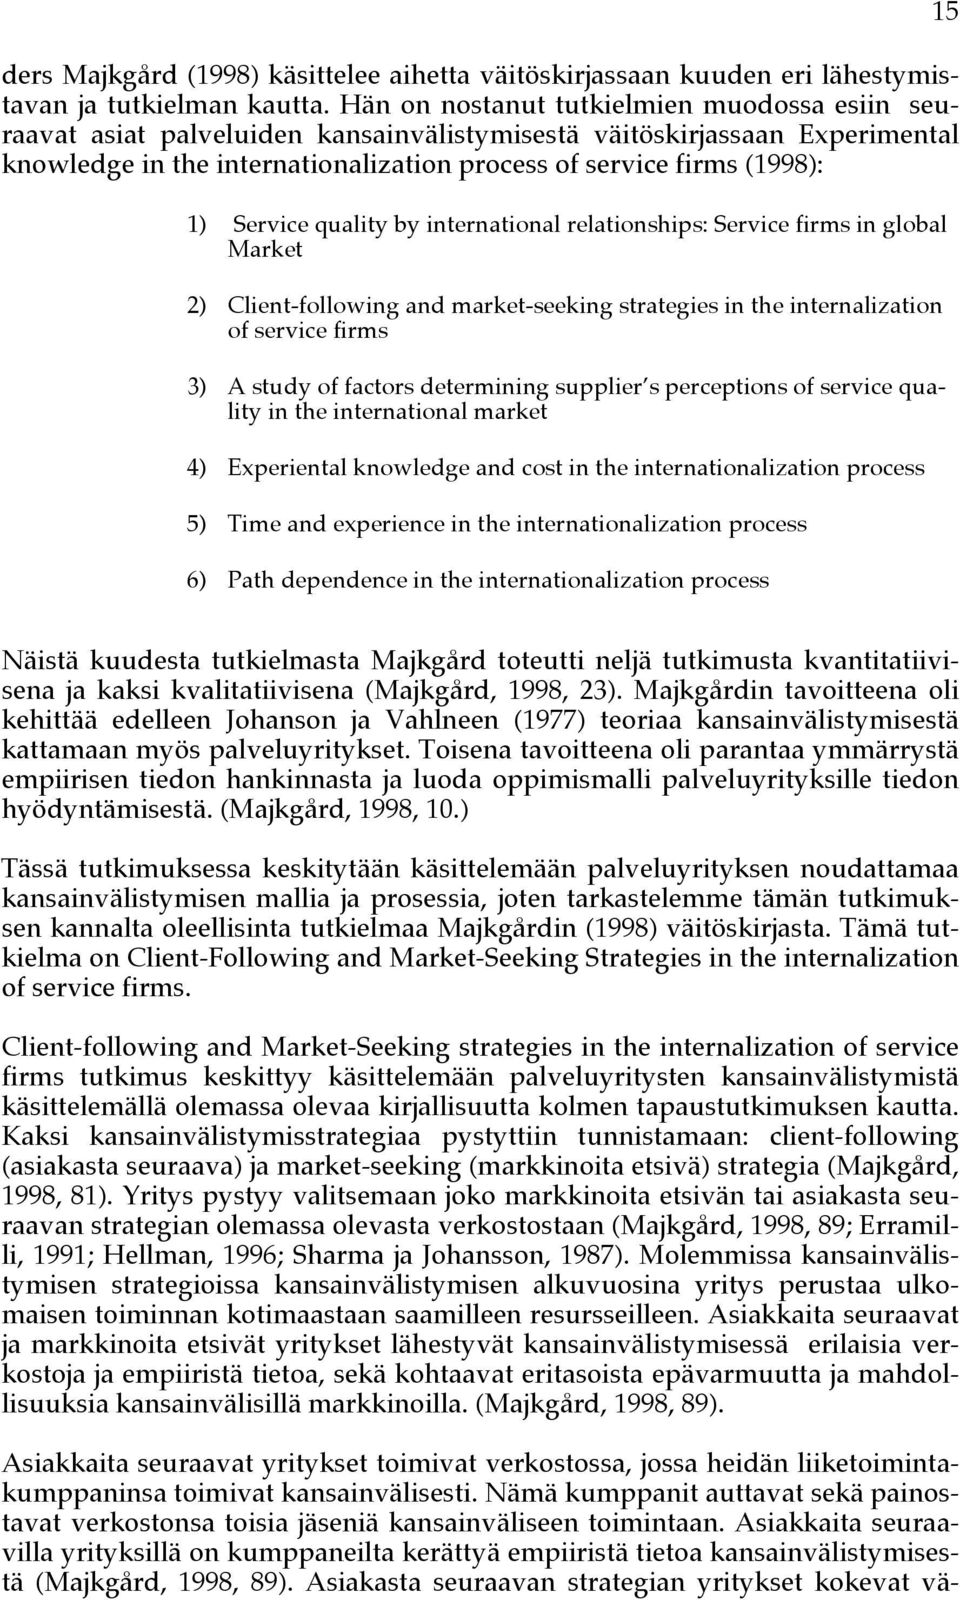 Service quality by international relationships: Service firms in global Market 2) Client-following and market-seeking strategies in the internalization of service firms 3) A study of factors